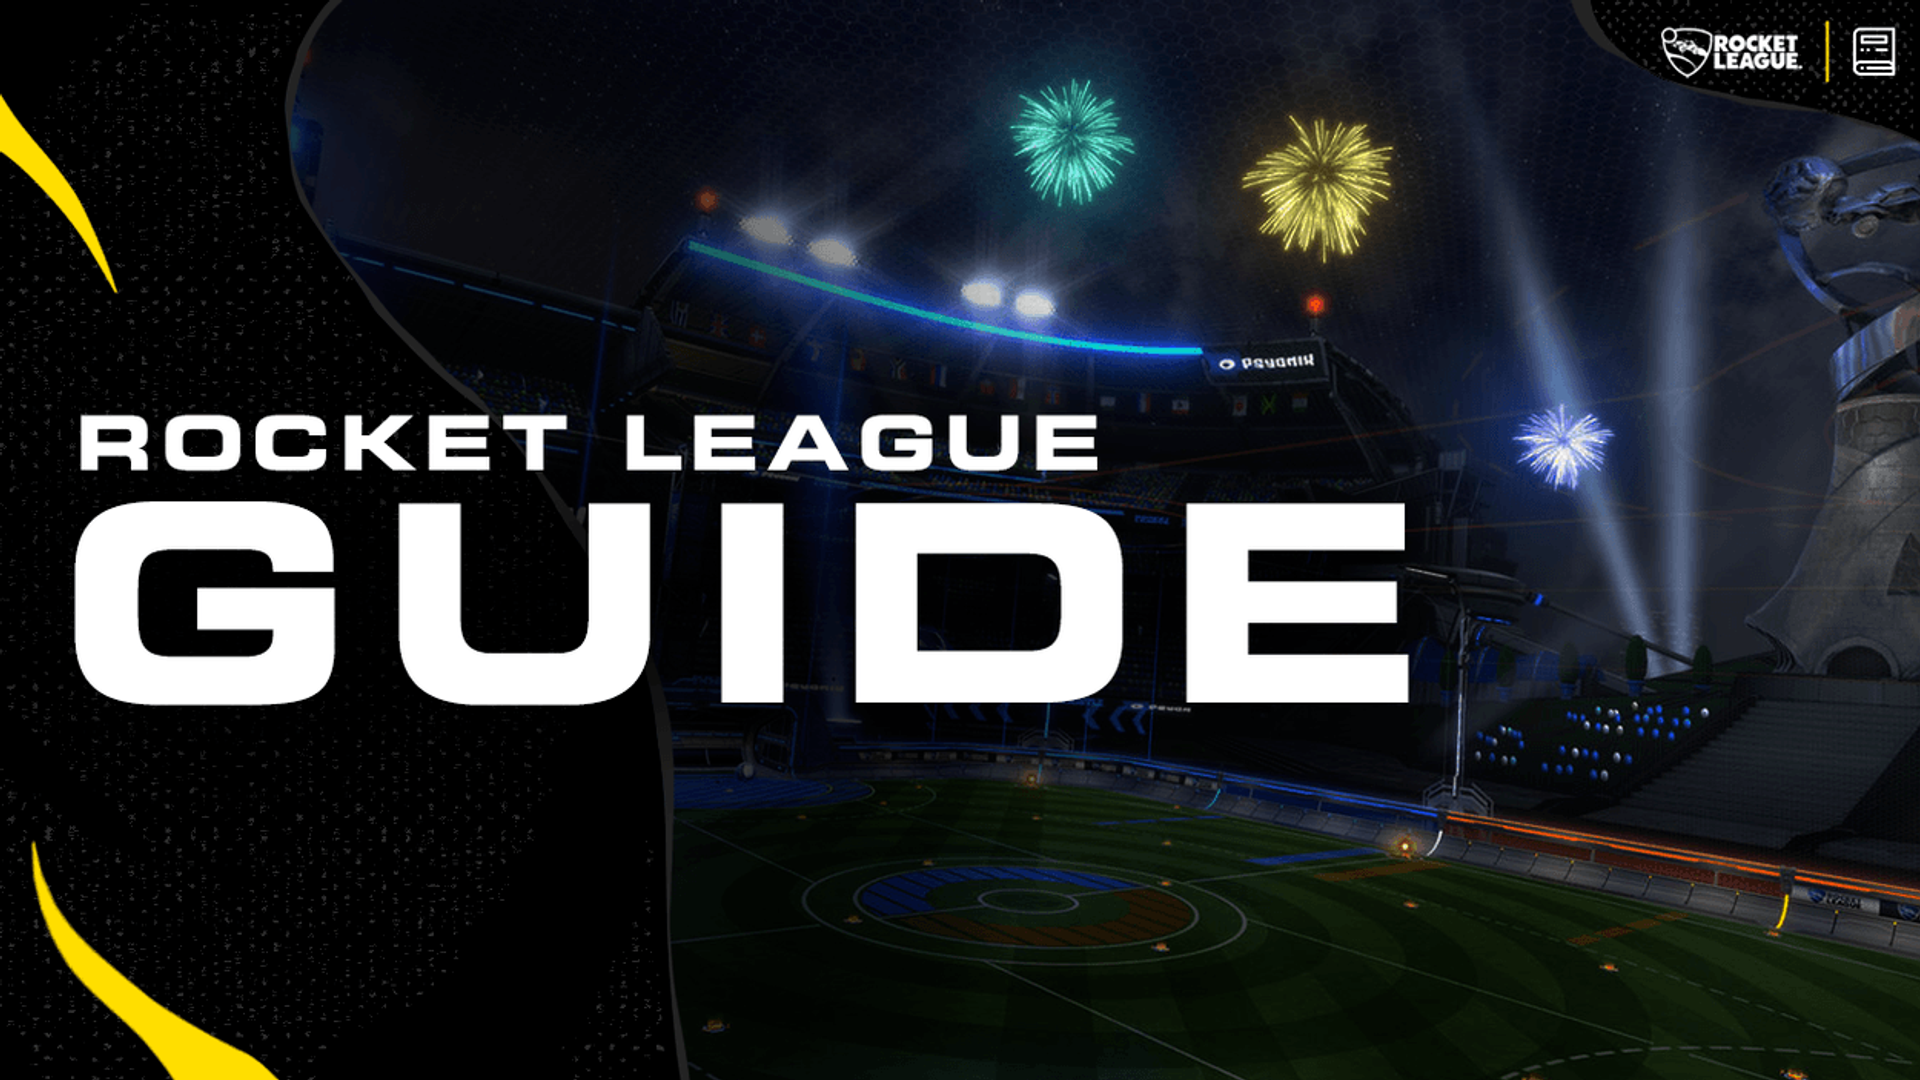 A Guide to Tournaments in Rocket League